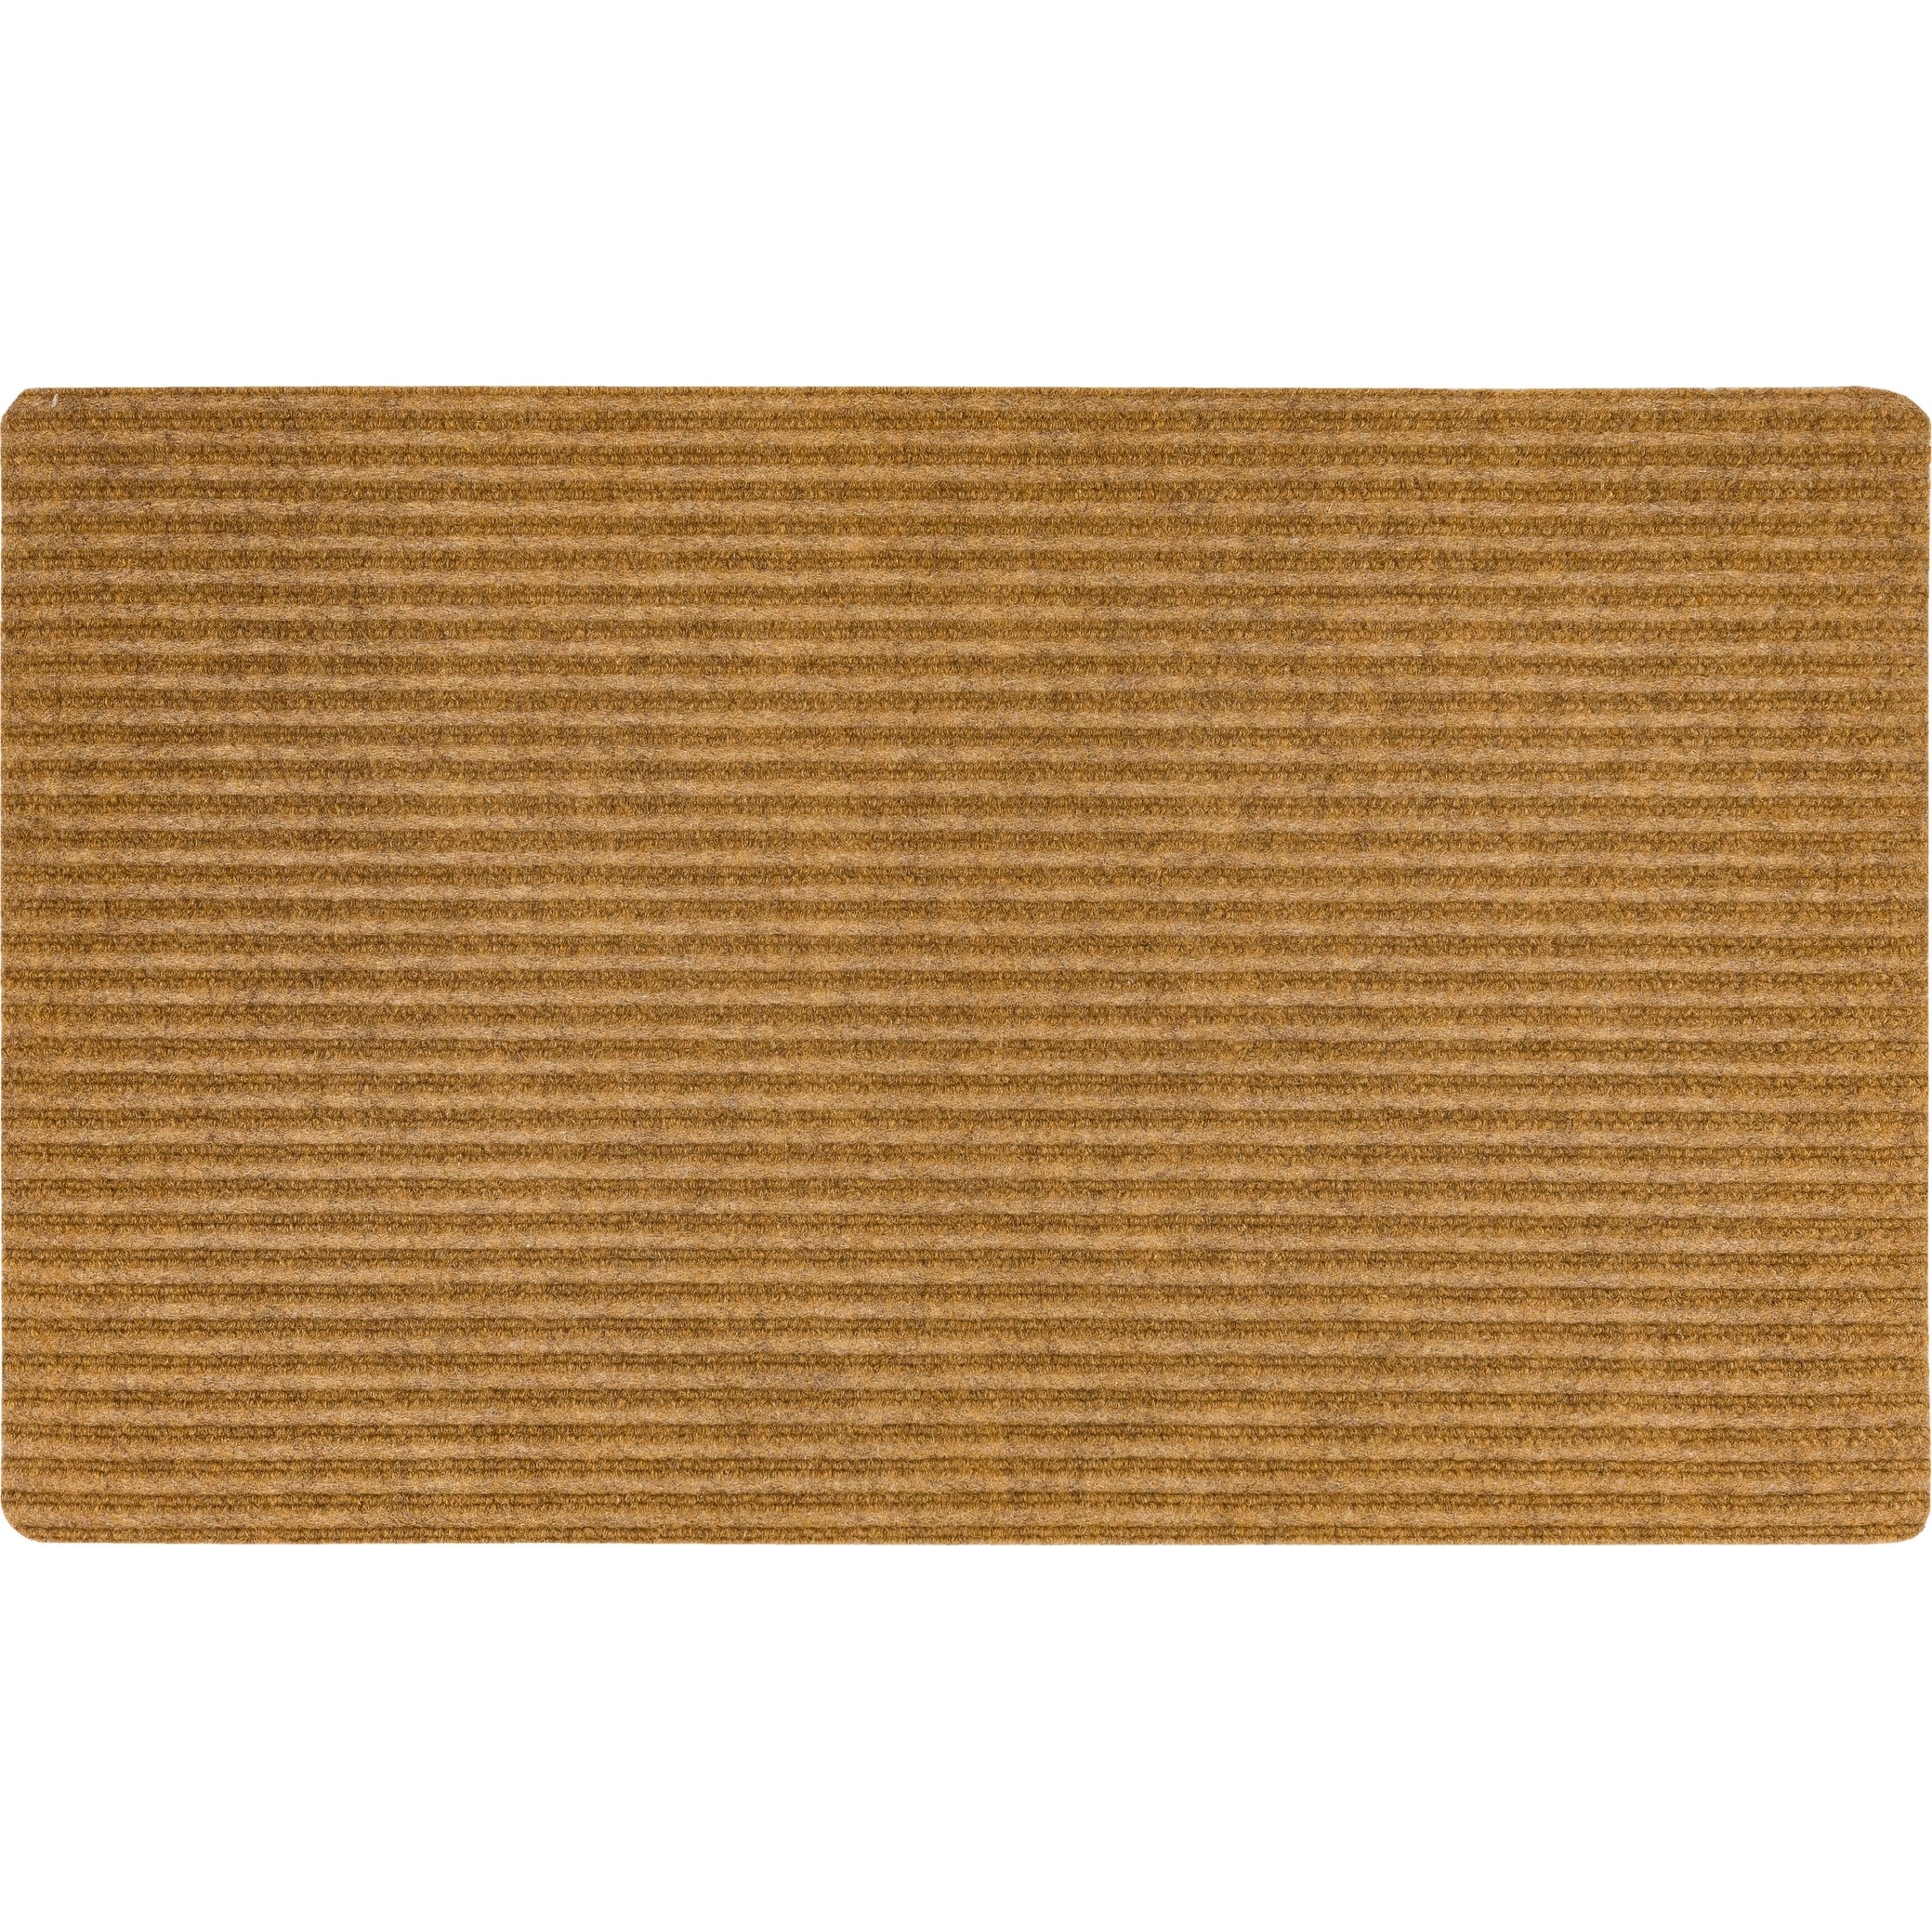 https://ak1.ostkcdn.com/images/products/is/images/direct/9dd32450664eda0c7e9638f00628f51ebcd1526d/Mohawk-Home-Utility-Floor-Mat-for-Garage%2C-Entryway%2C-Porch%2C-and-Laundry-Room.jpg